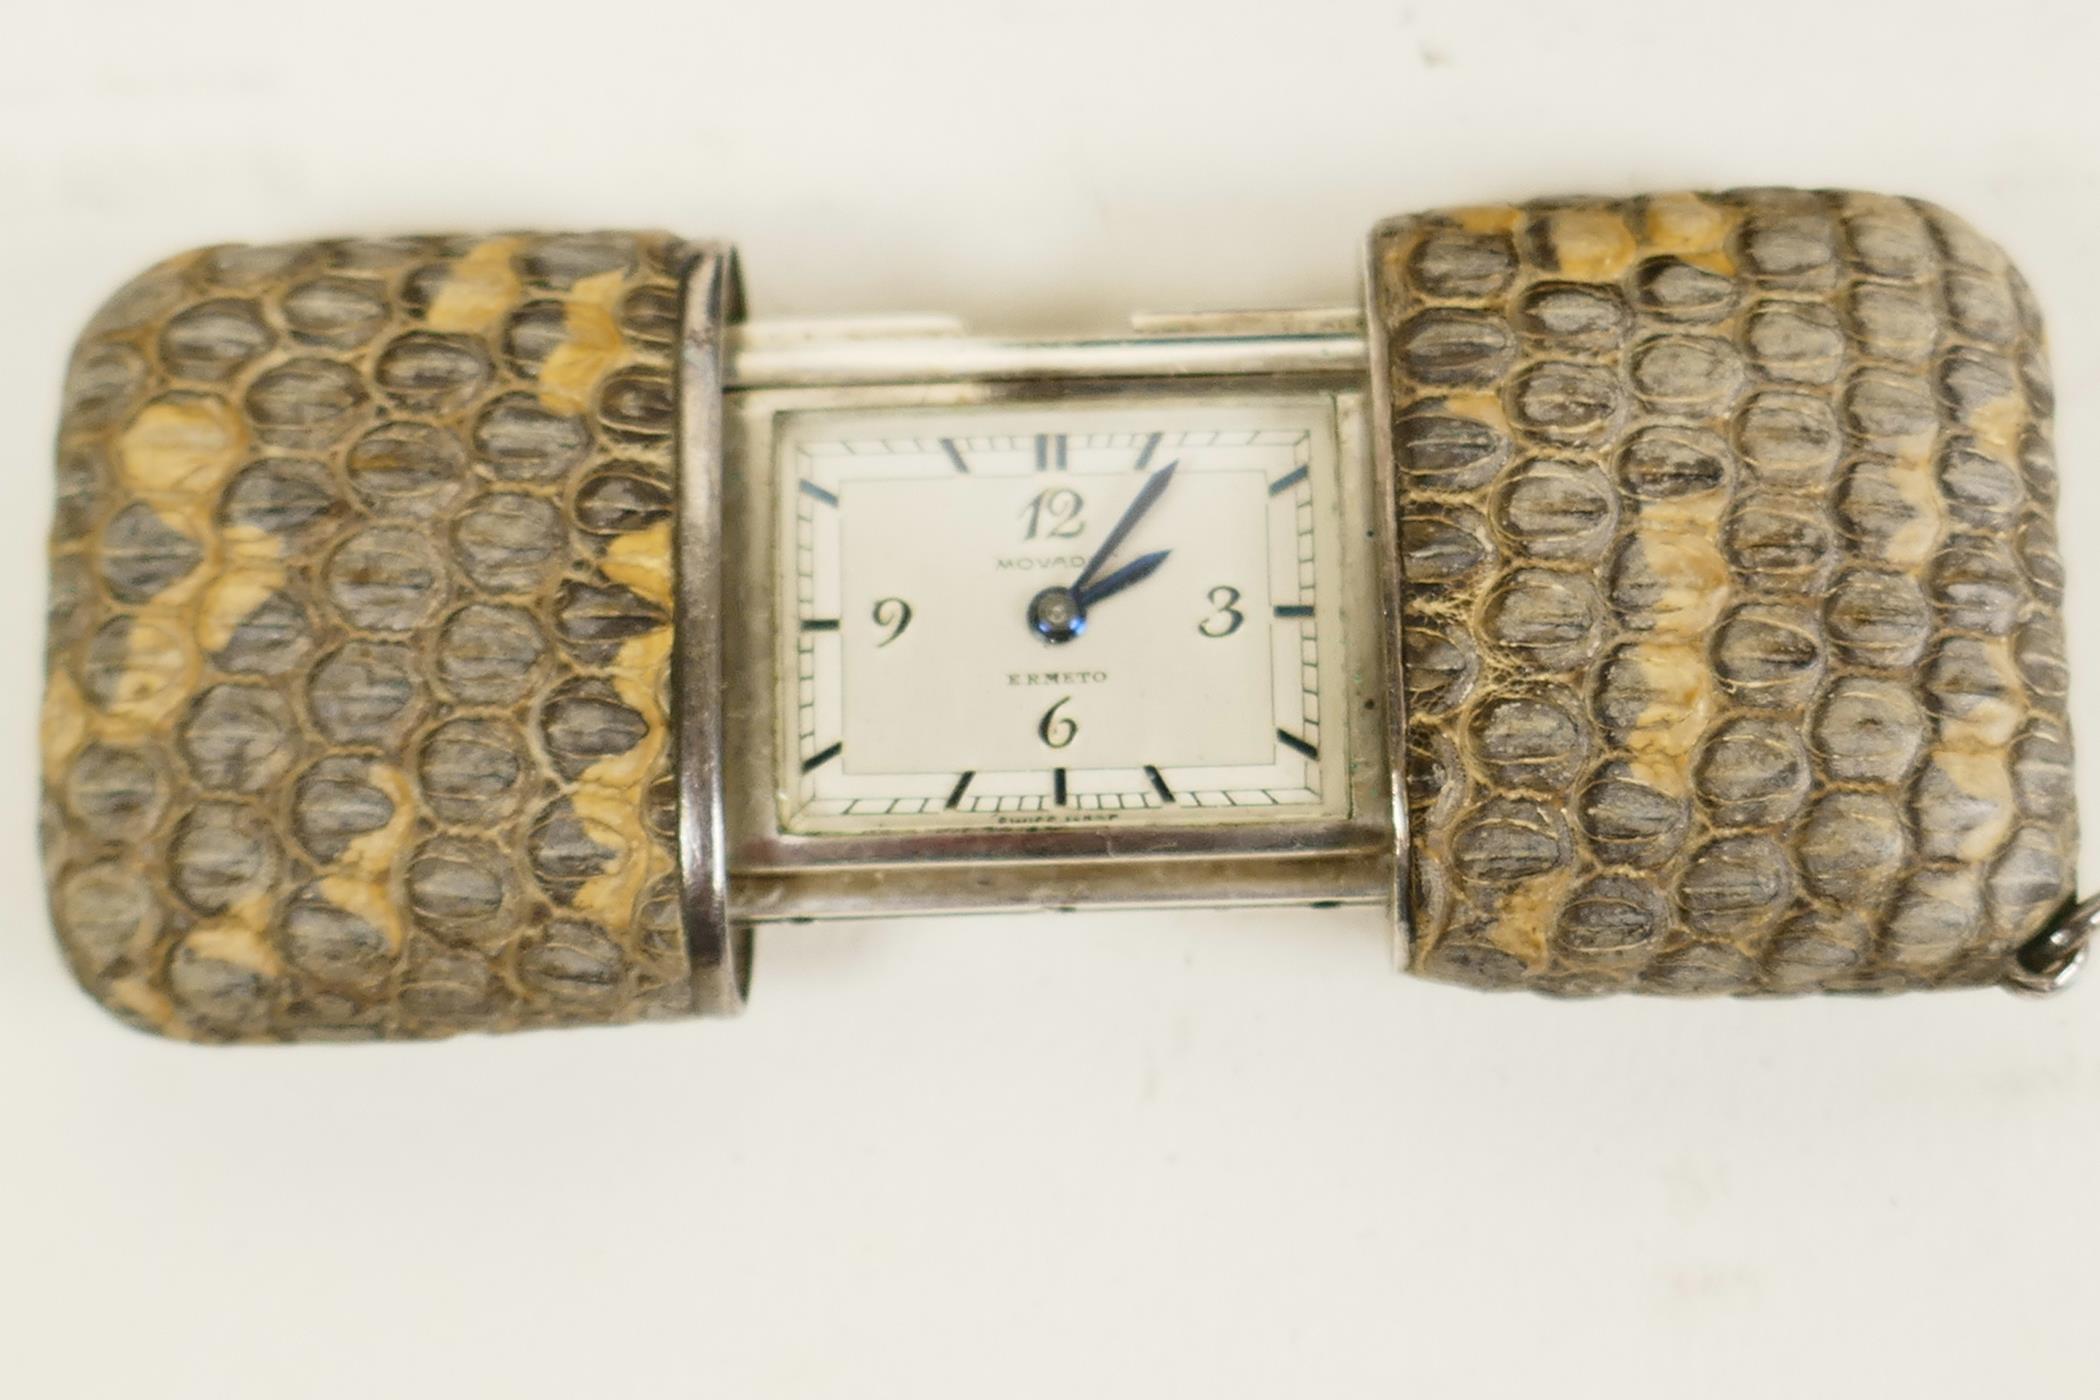 A Movado 'Baby Ermeto' purse watch with snakeskin case in its original presentation box, 1¾" long